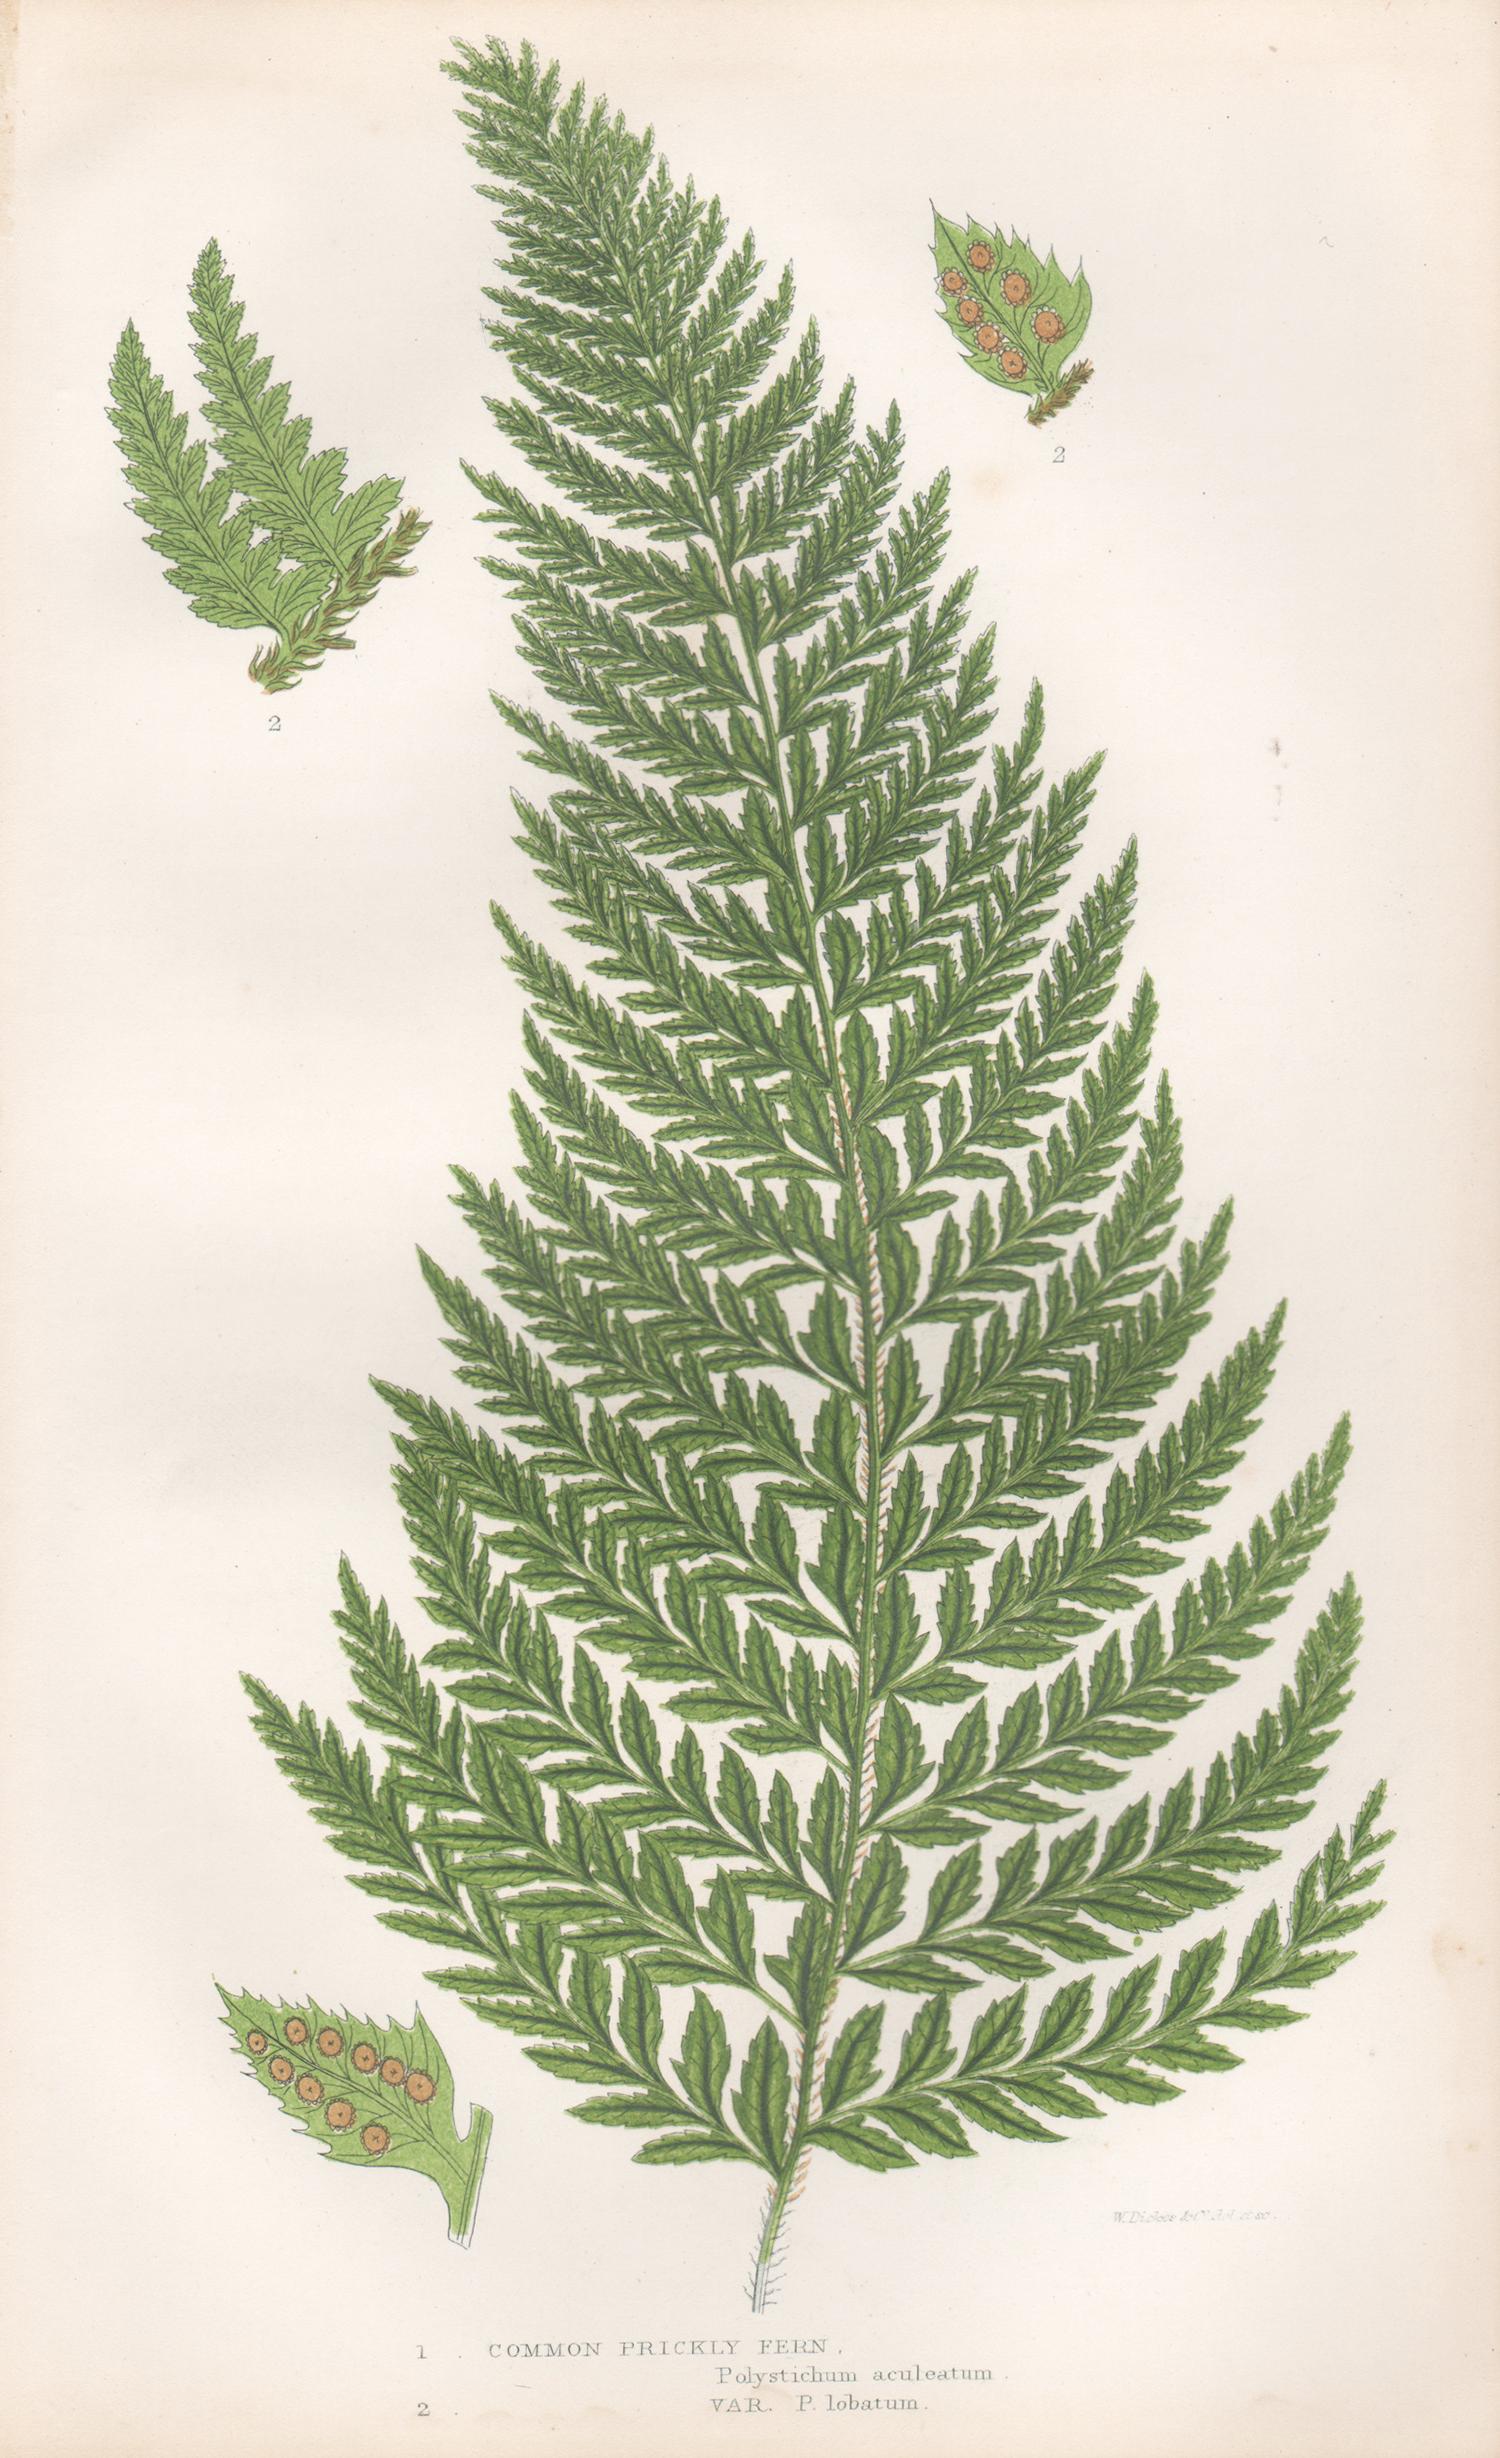 Ferns - Collection of 22 antique fern botanical woodblock prints - Print by William Dickes